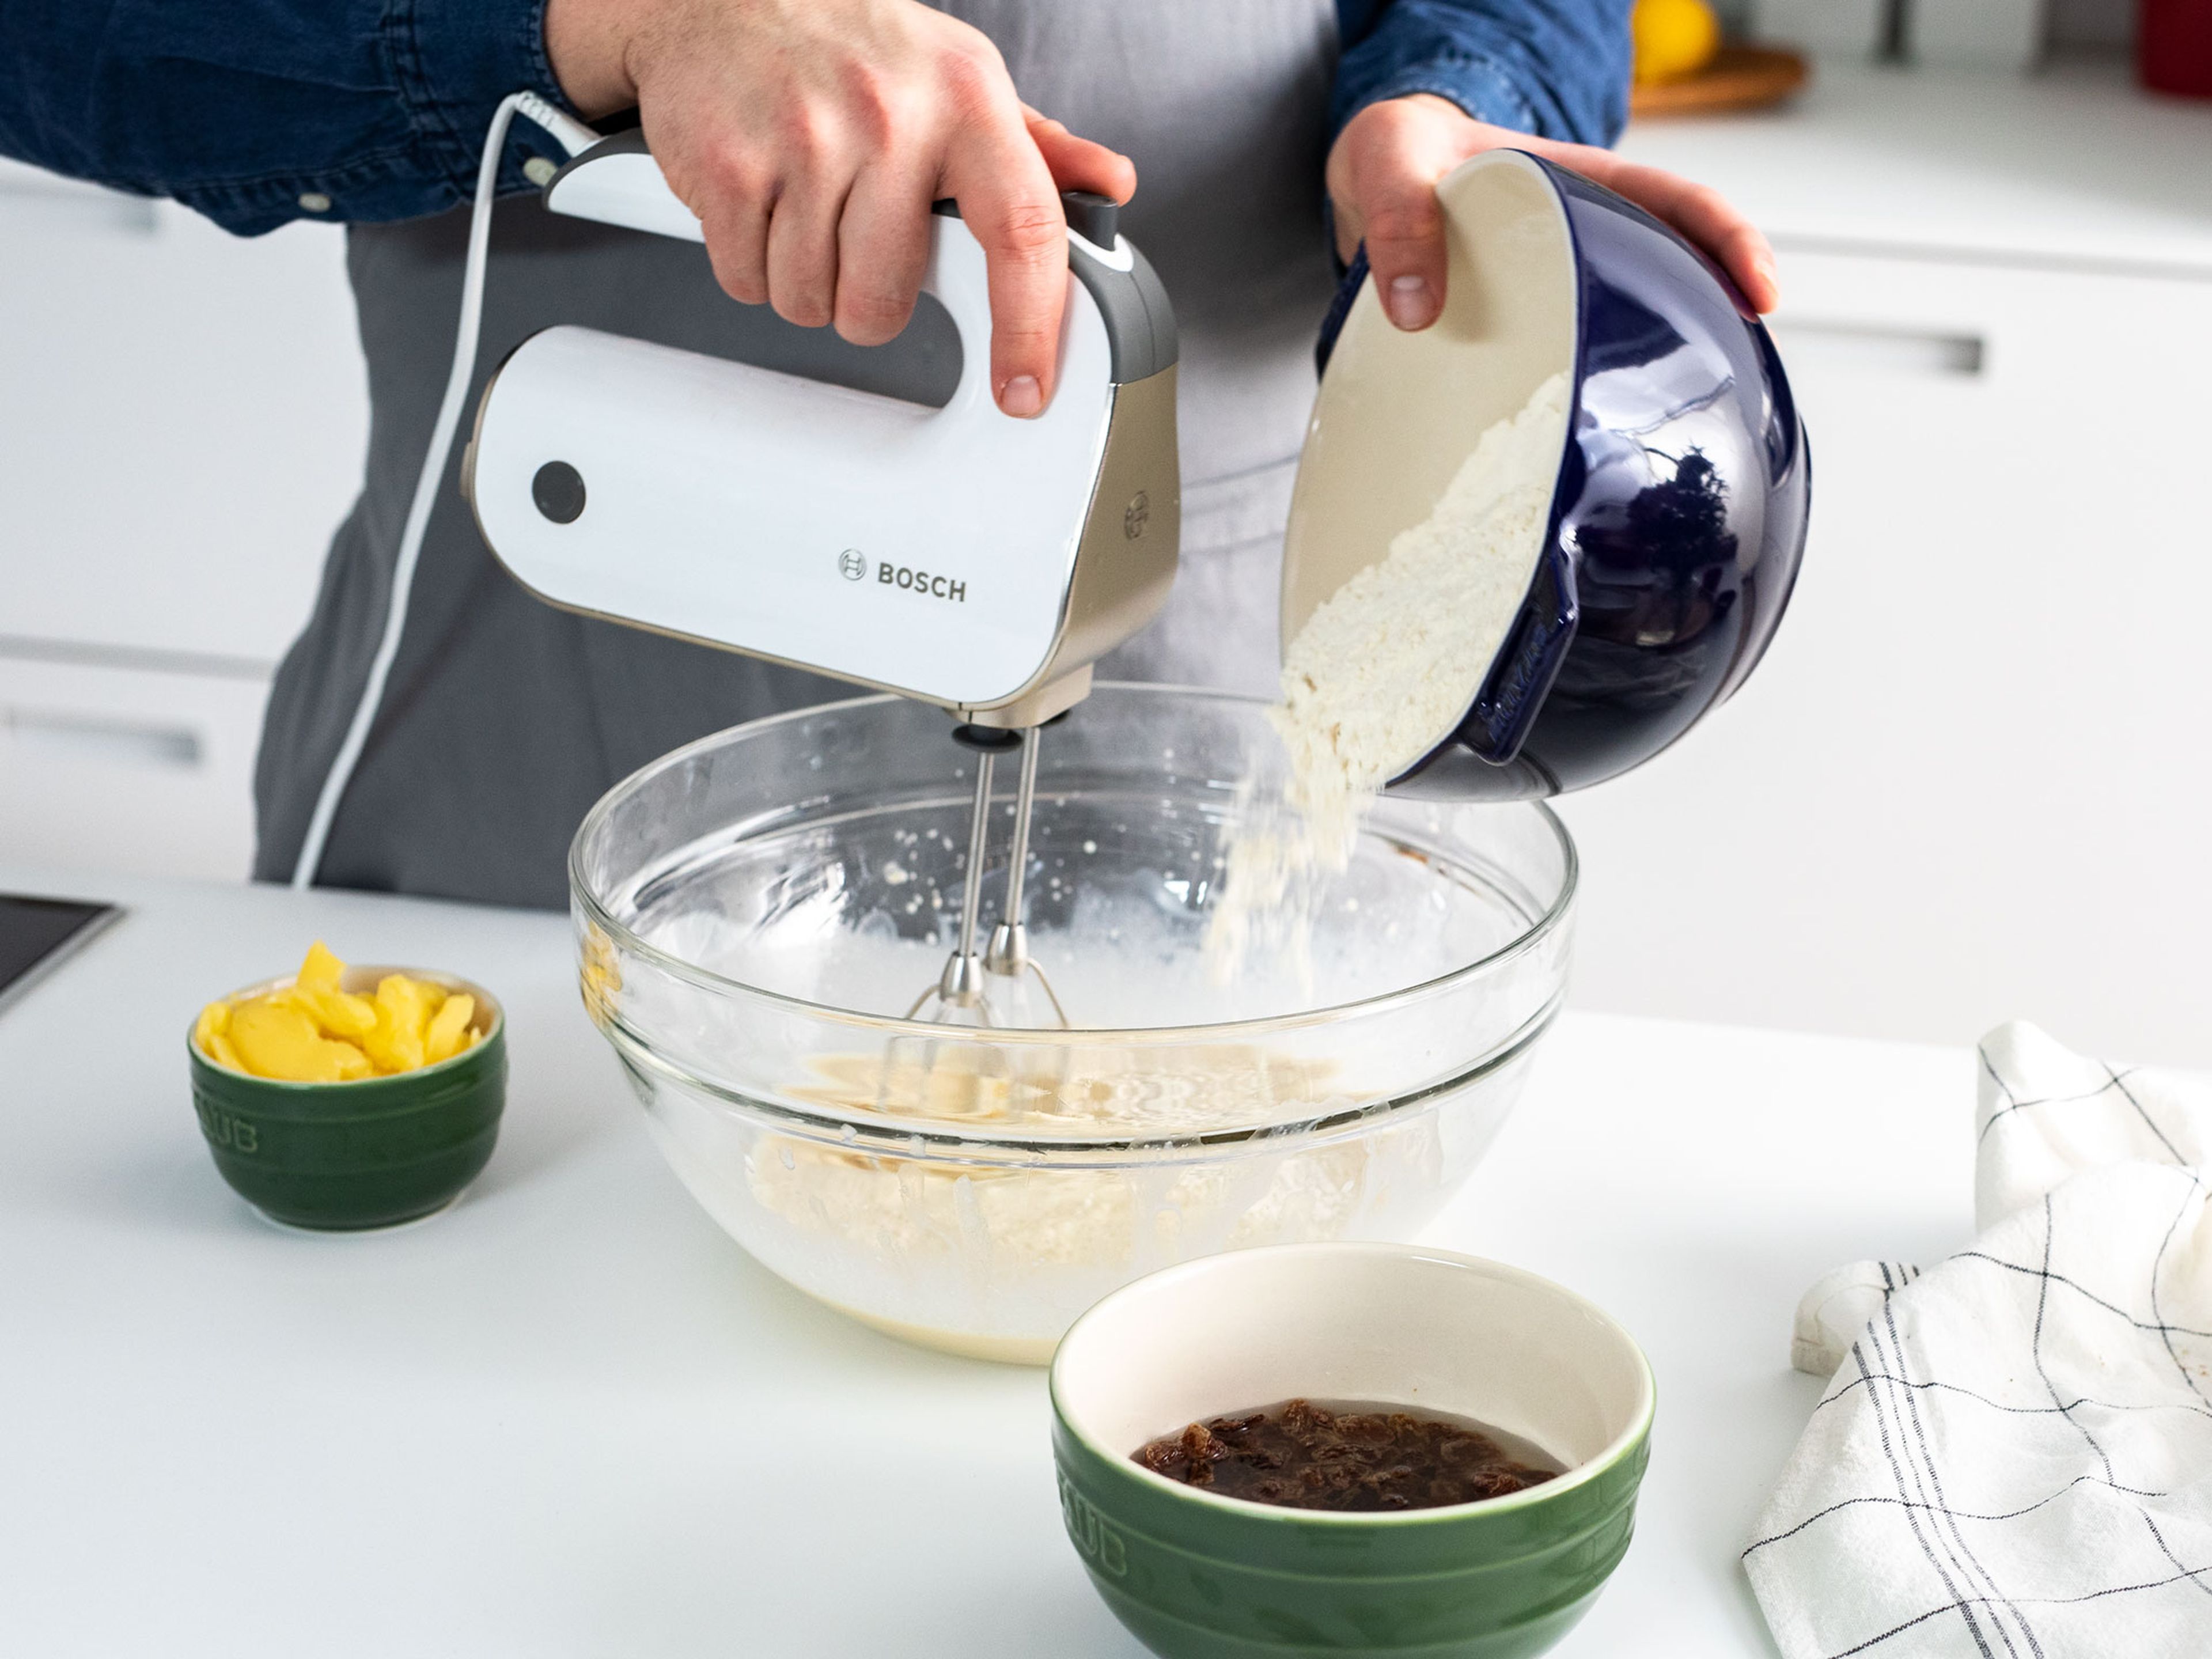 Soak raisins in cold water. Whisk together fresh yeast with milk and sugar. Add the flour, salt, and eggs. Using a hand mixer, mix all ingredients together until a dough forms. Allow dough to rise in a warm place for approx. 20 min.